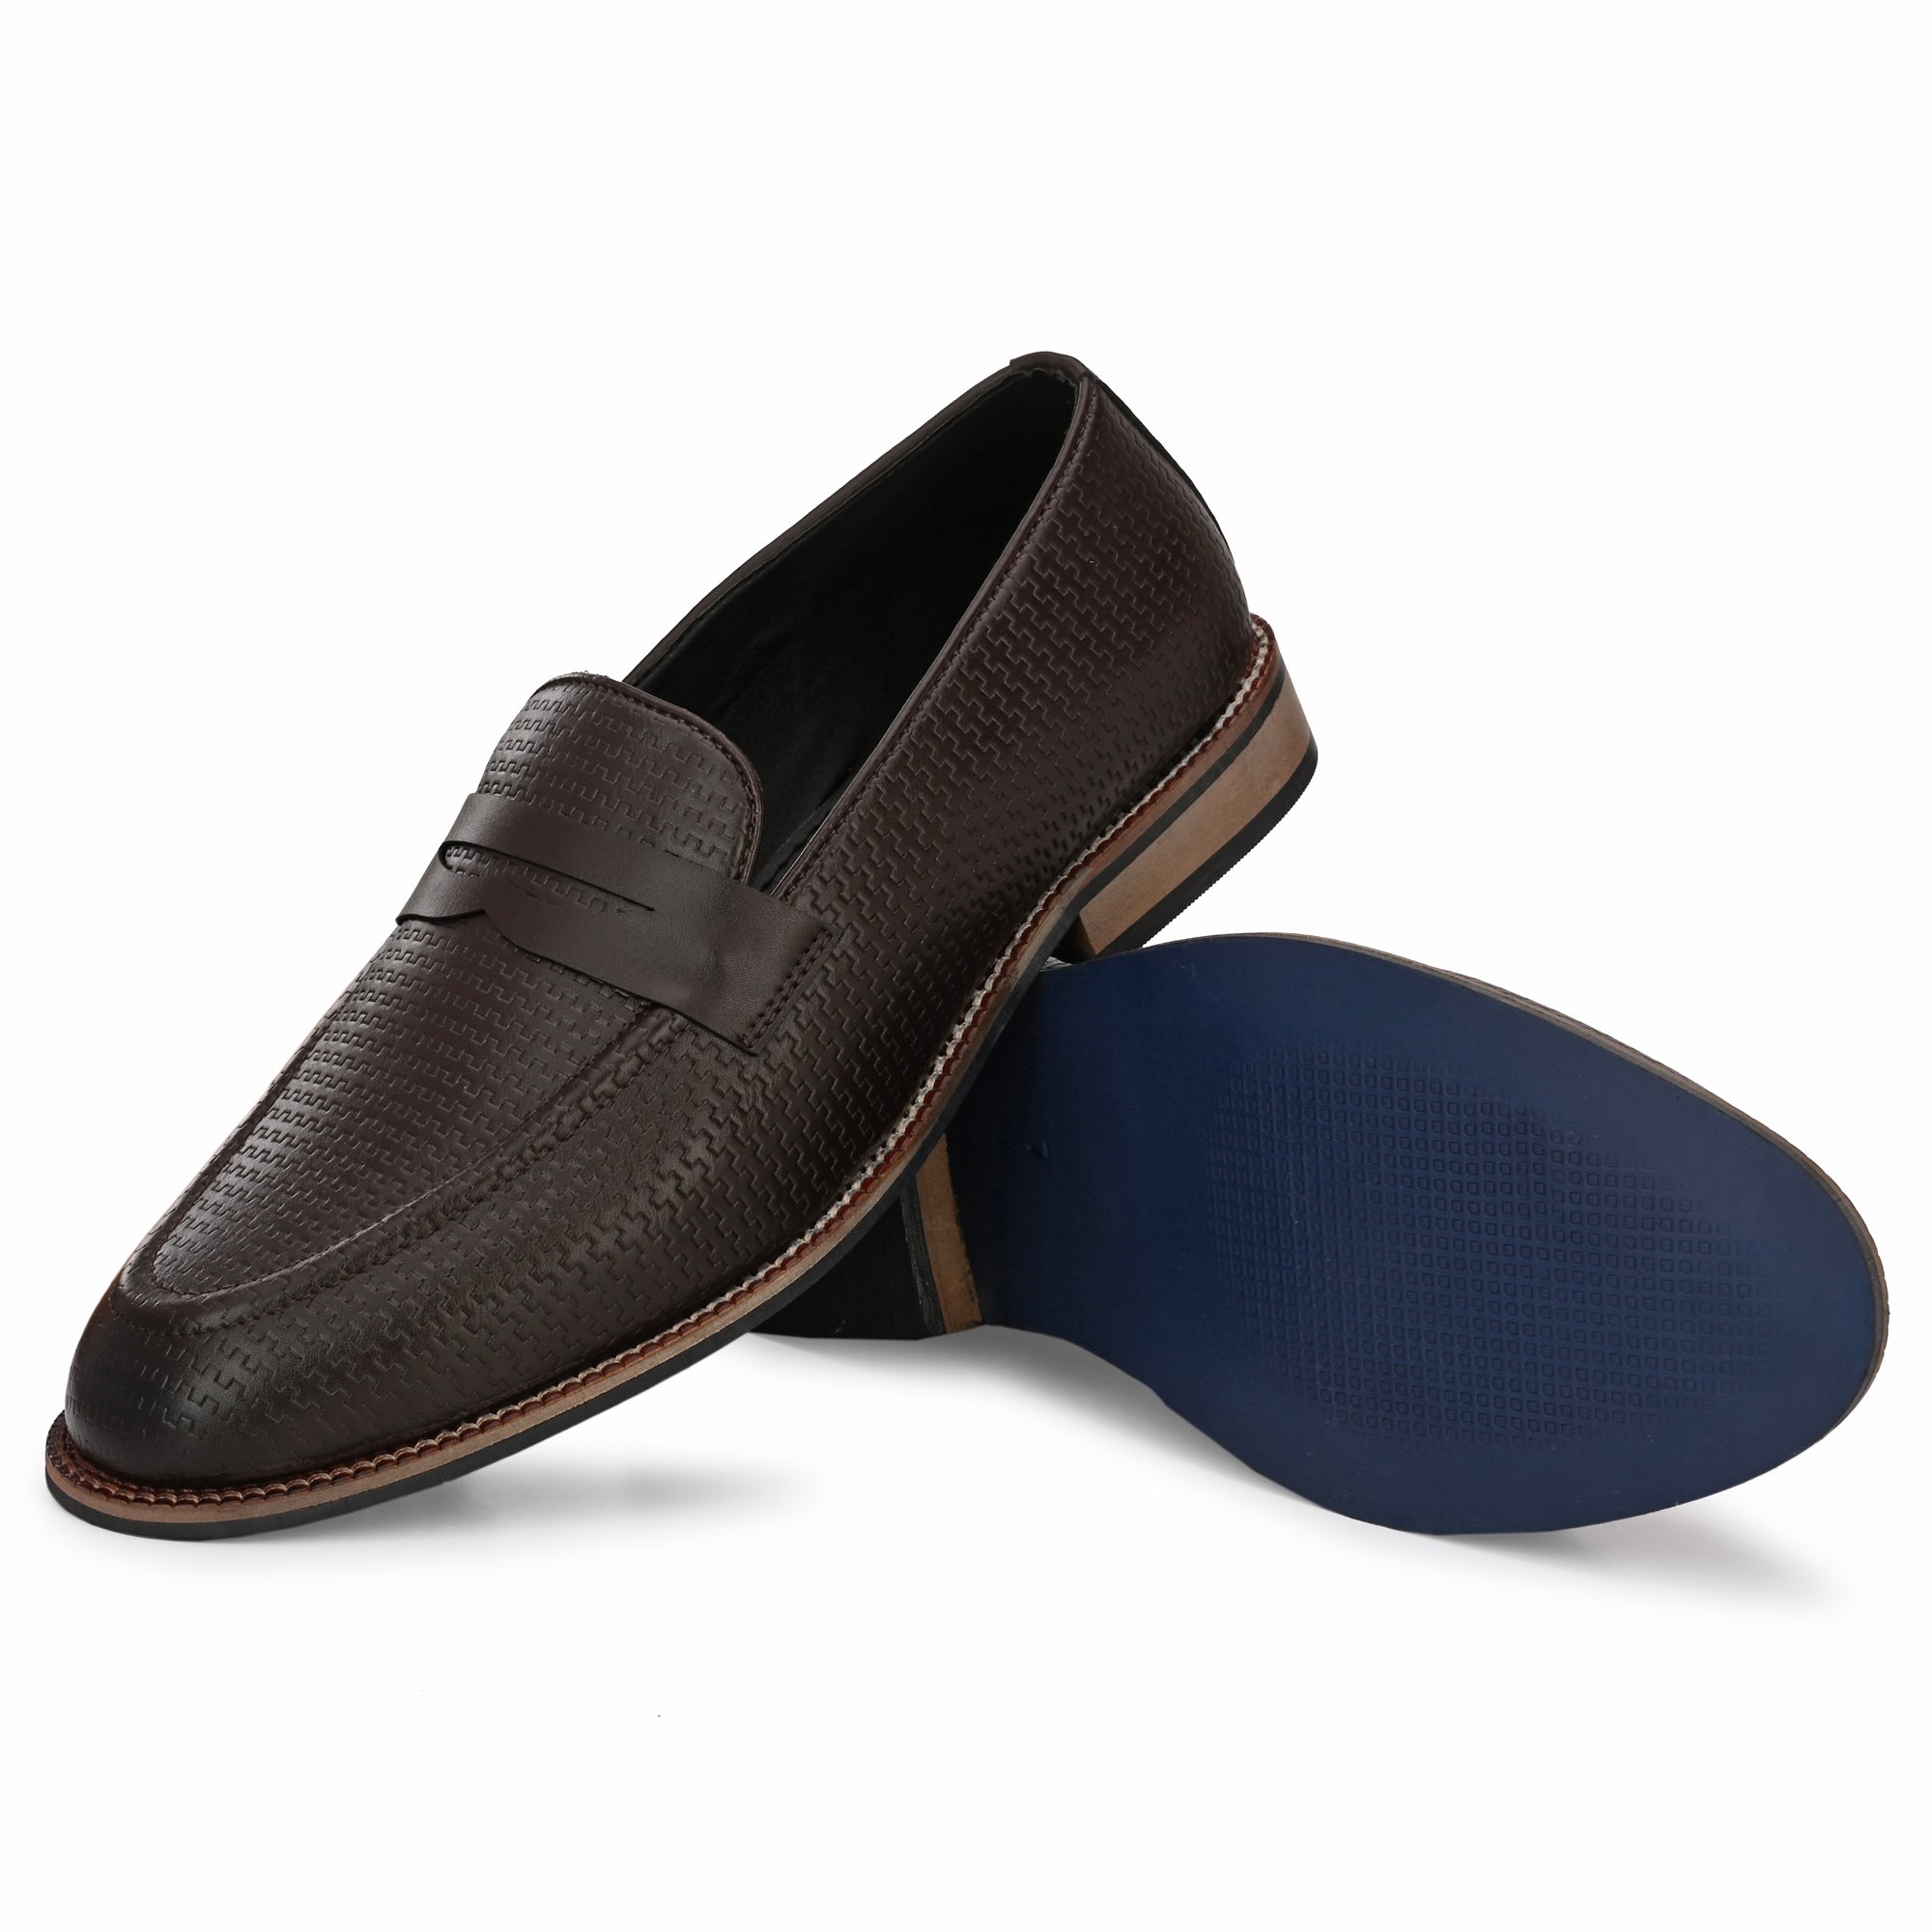 attitudist-brown-round-toe-textured-apron-loafers-for-men